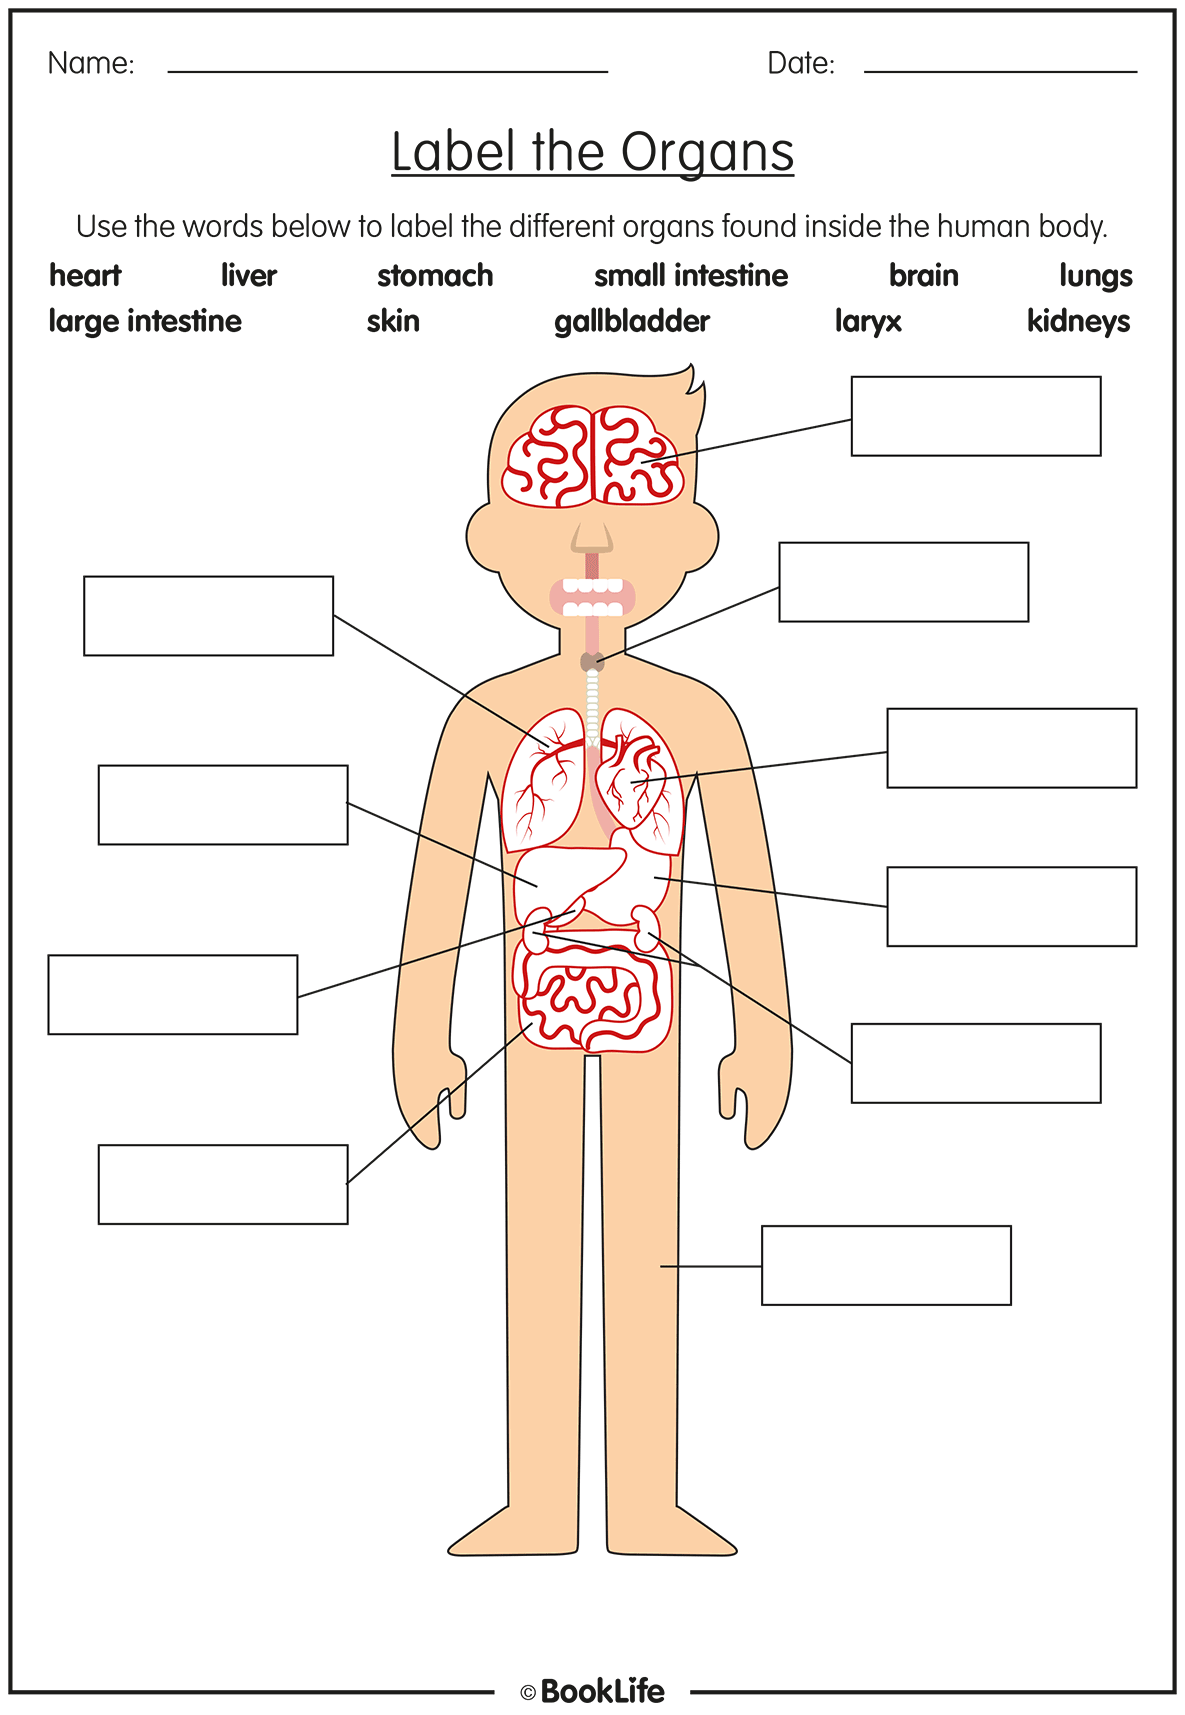 Organs of the Human Body by BookLife